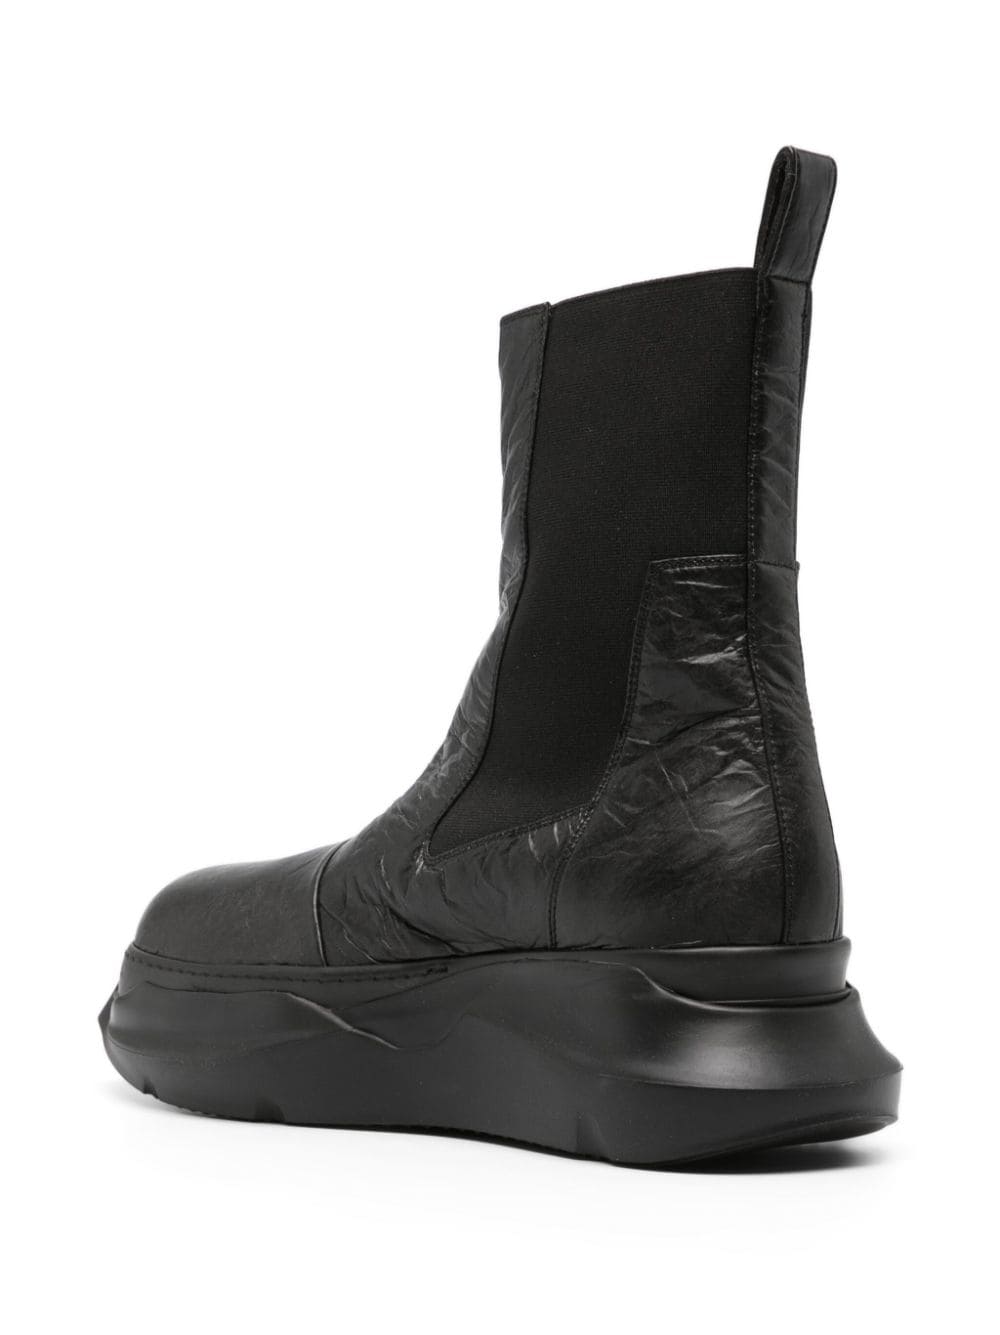 RICK OWENS DRKSHDW Beatle Abstract Boots – Atelier New York